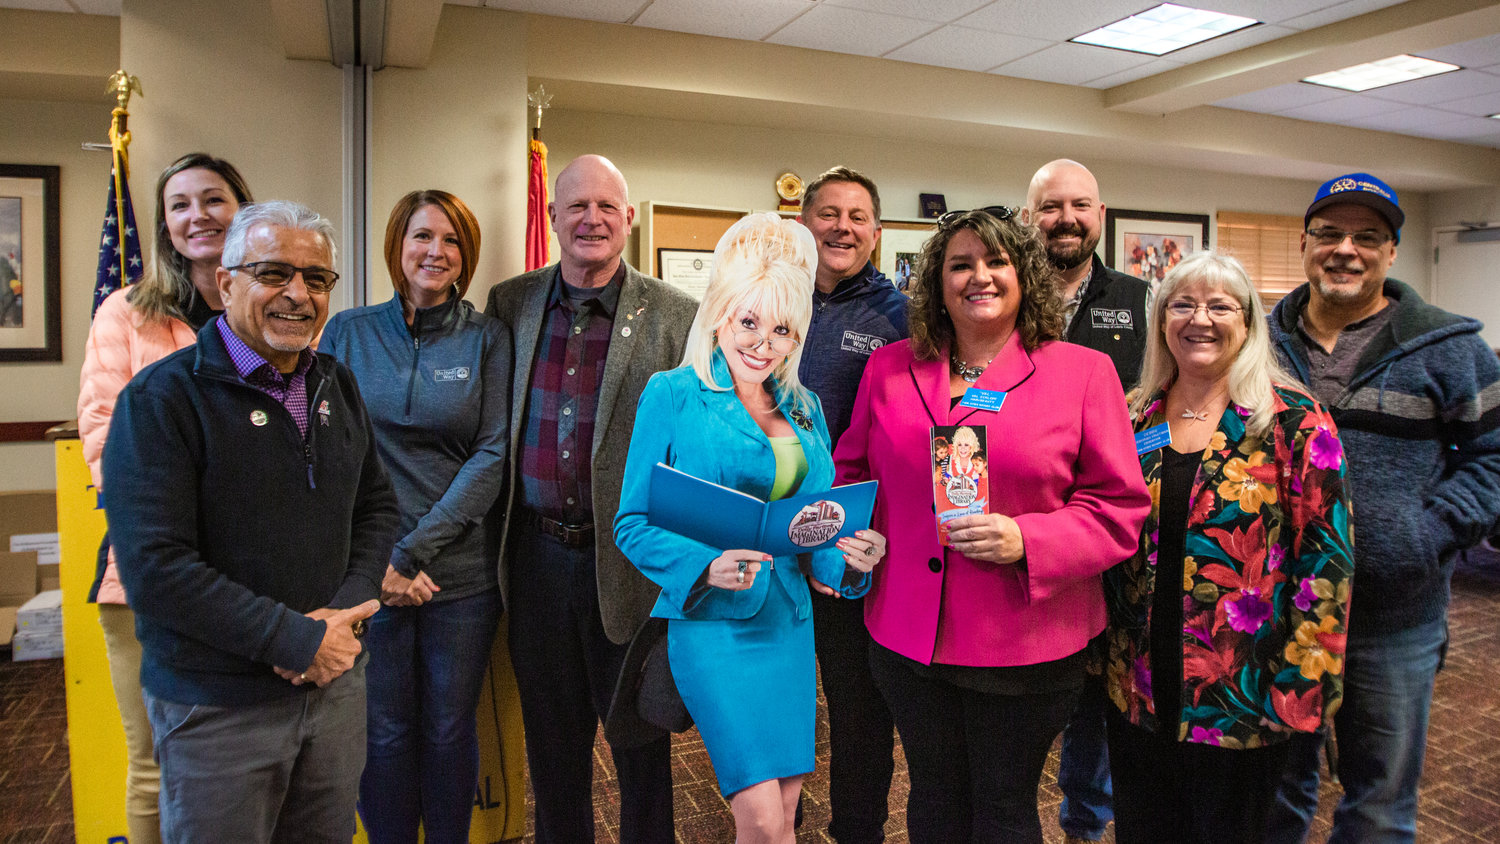 Rotarians and staff from United Way stand with a cardboard cutout of Dolly Parton to celebrate the three-year anniversary of the Dolly Parton Imagination Library being kicked off in Lewis County at the Holiday Inn in Chehalis on Friday. The program provides books for young kids at no cost to the families.